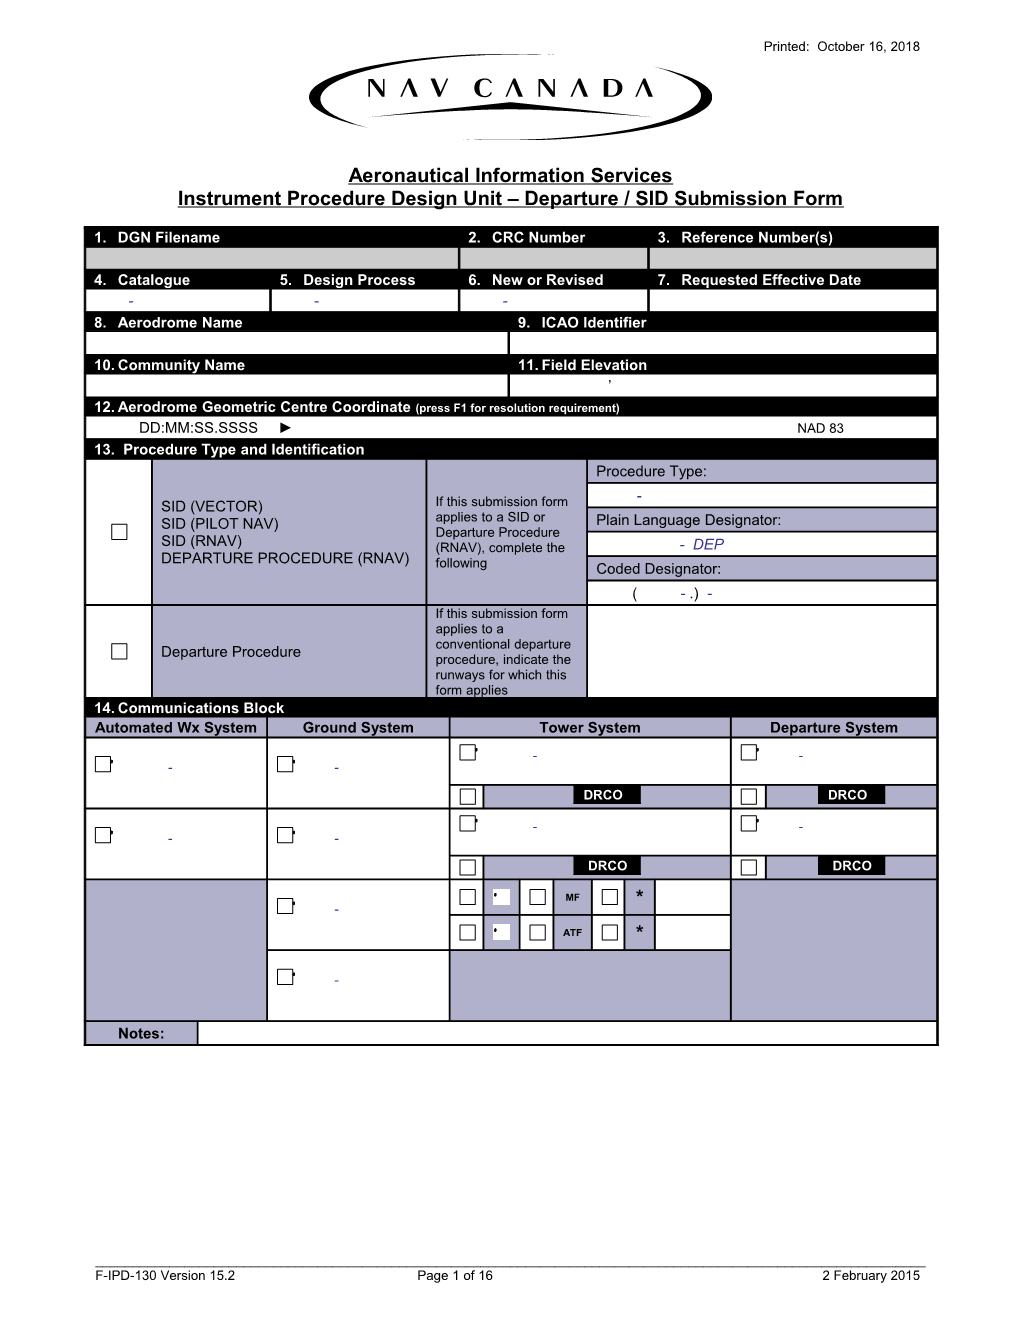 F-IPD-130 Departure - SID Submission Form